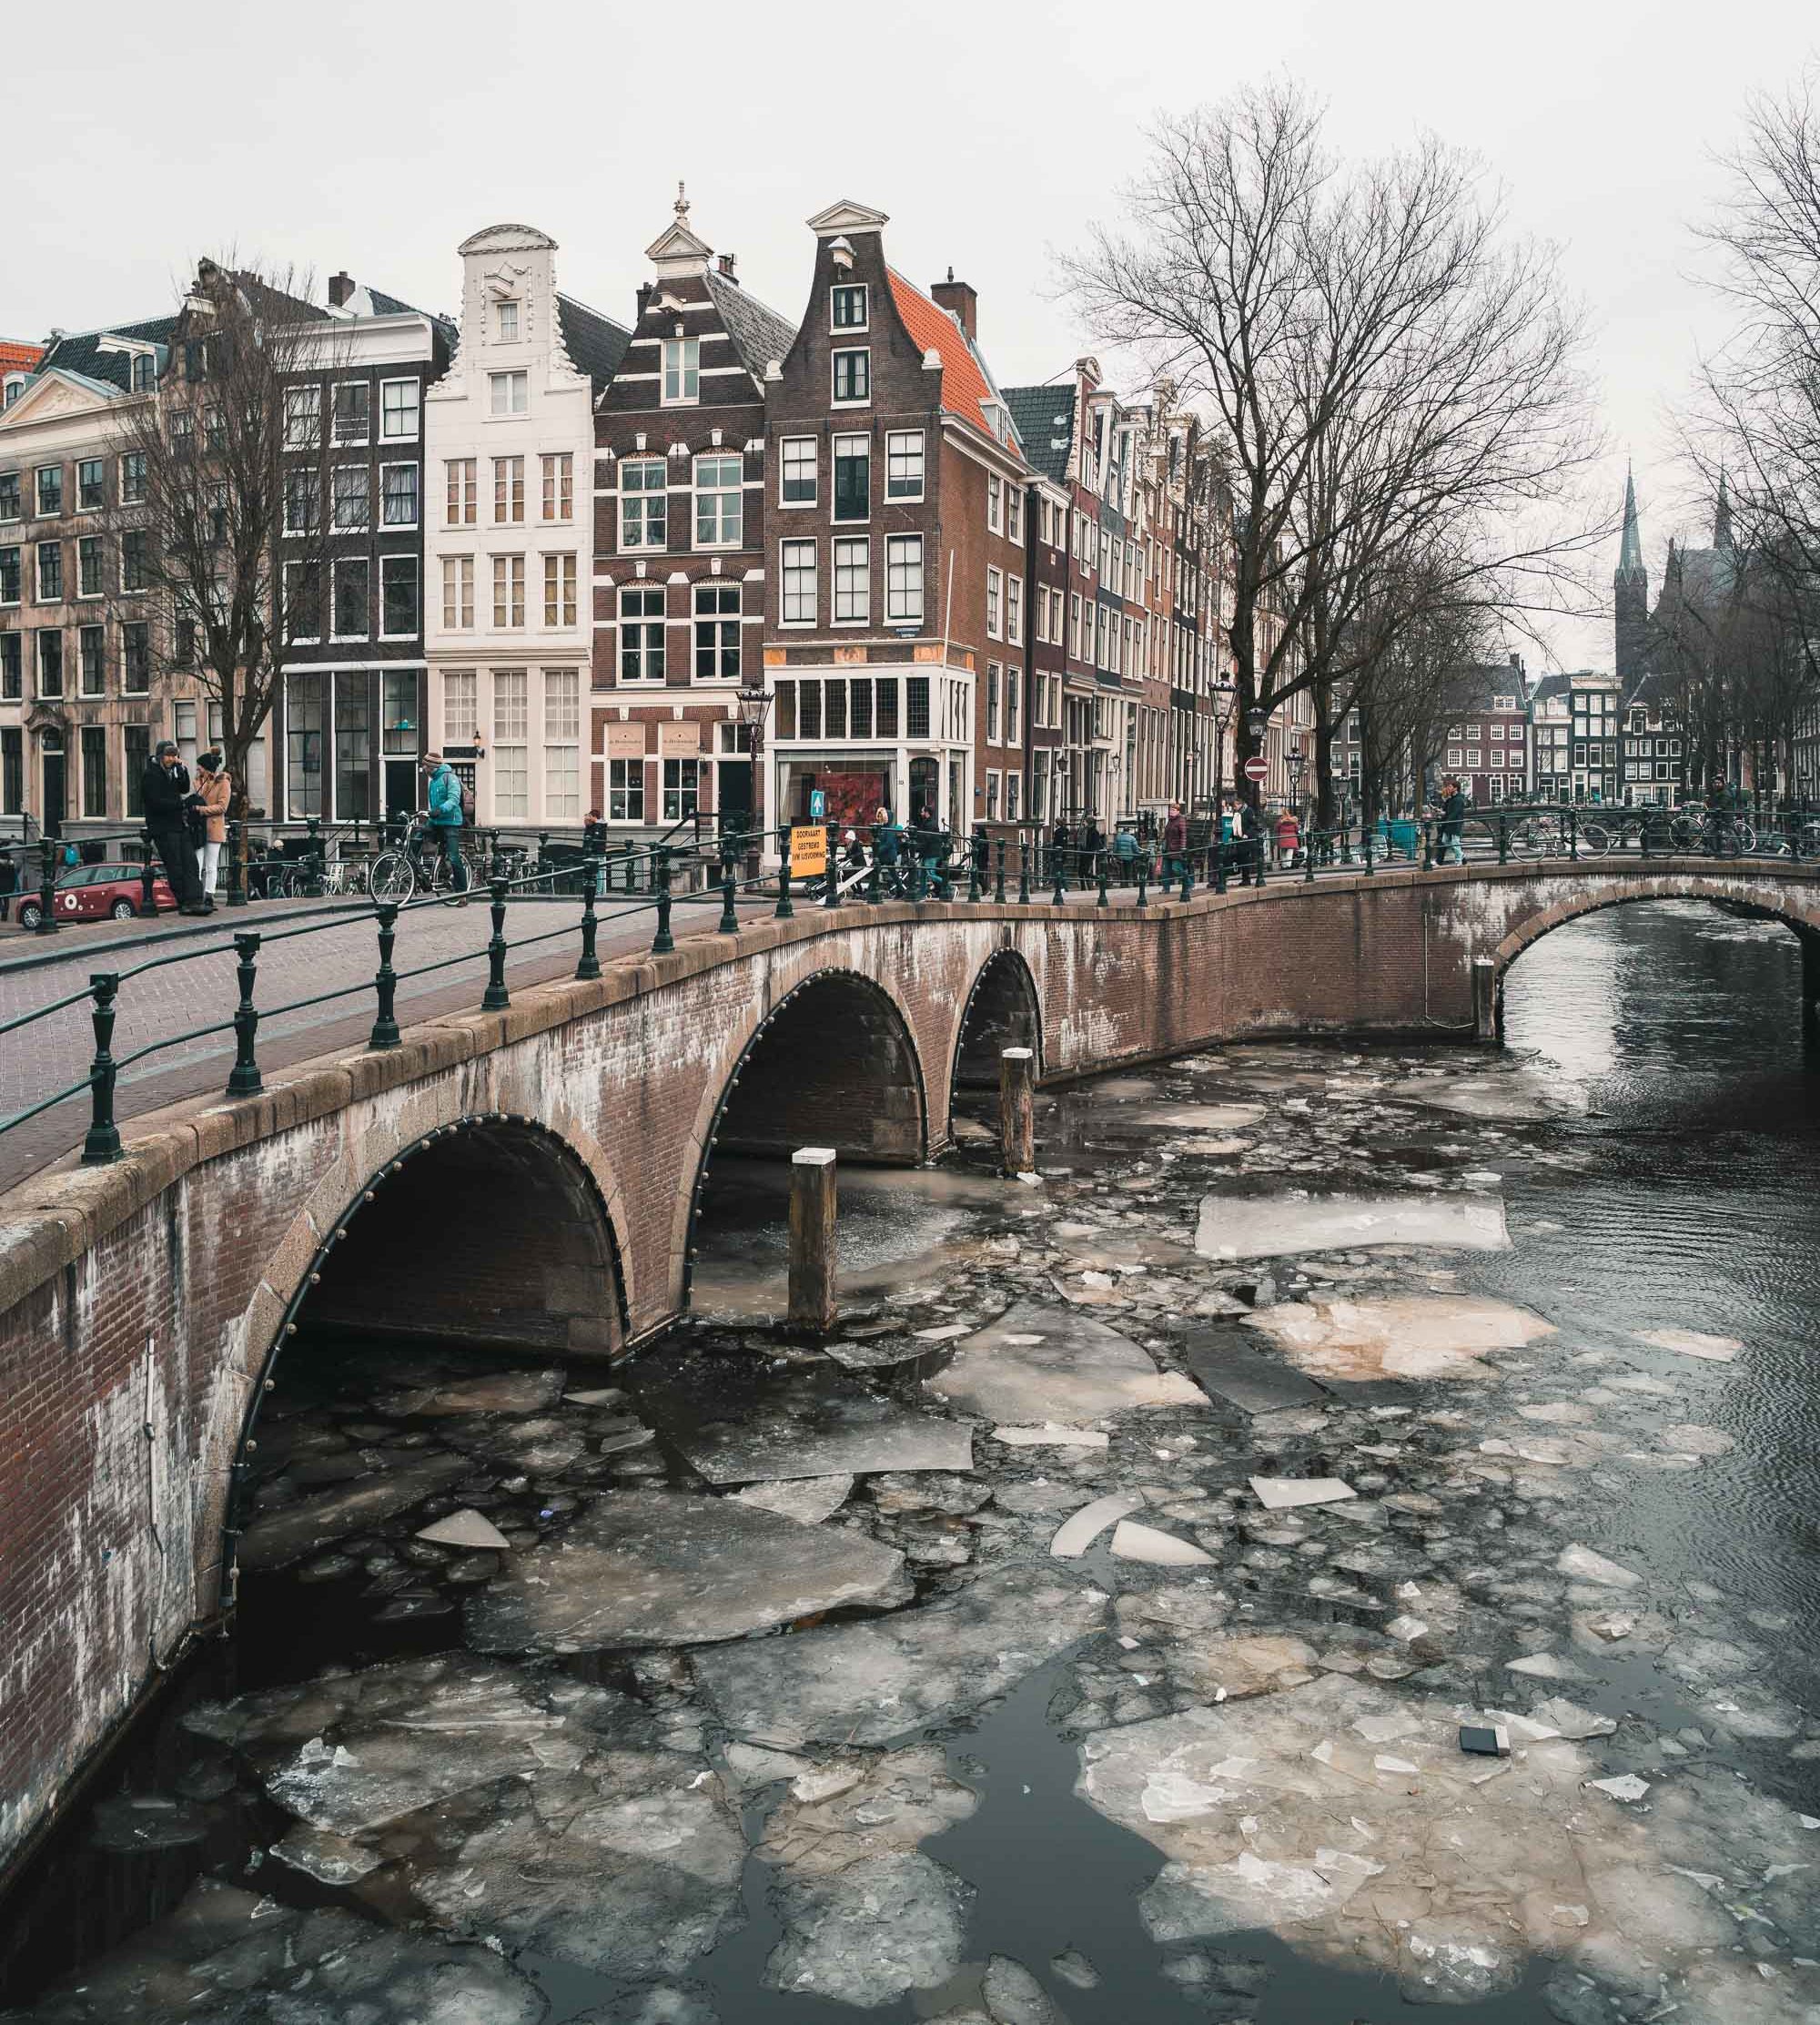 Semi-frozen canals with ice in winter at sunset in Amsterdam The Netherlands